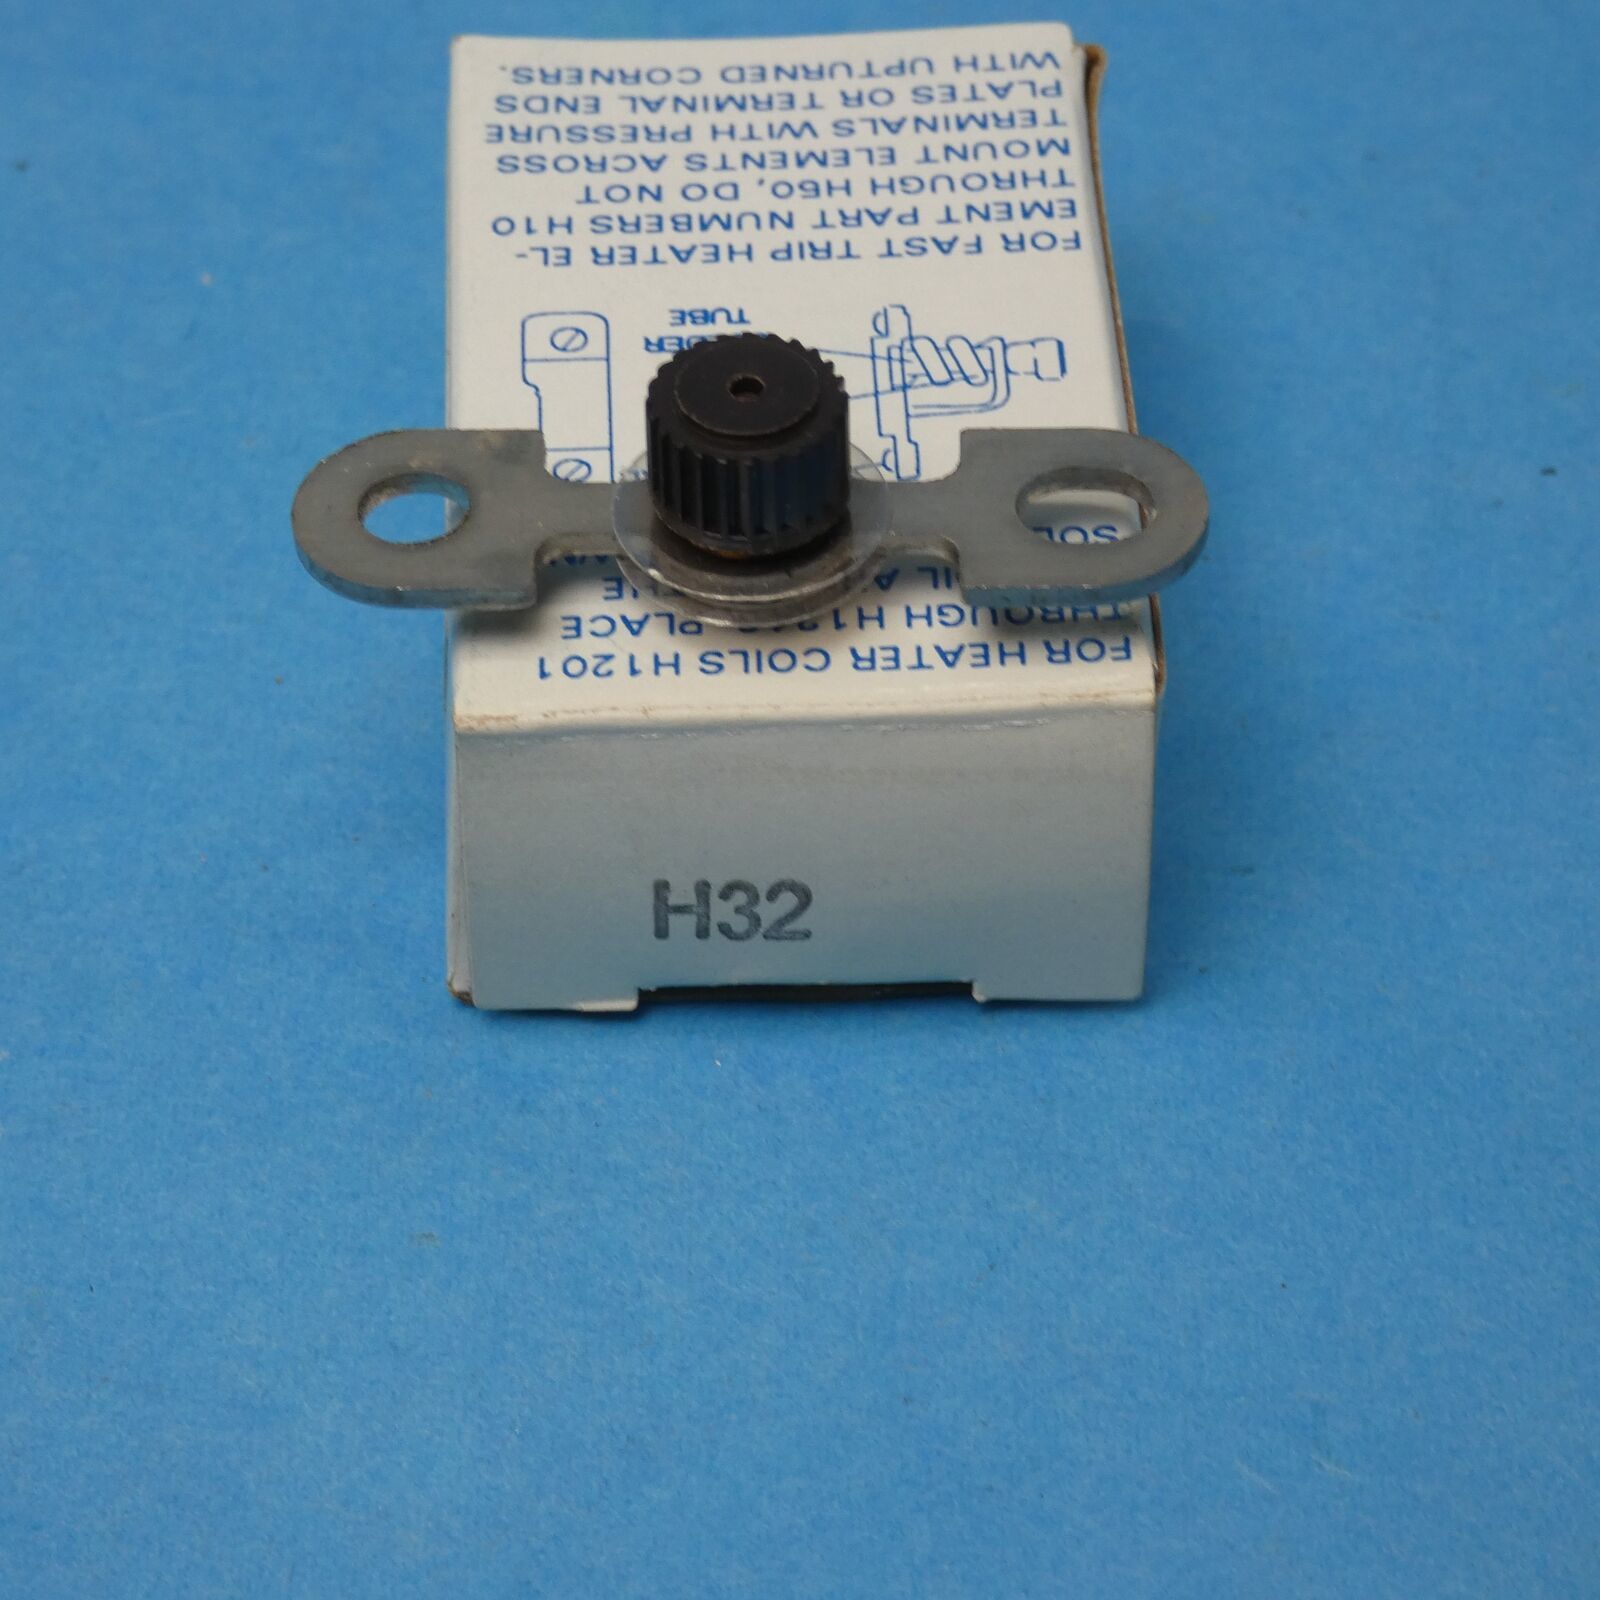 Primary image for Eaton Cutler Hammer Westinghouse H32 Fast Trip Thermal Overload Relay Heater New